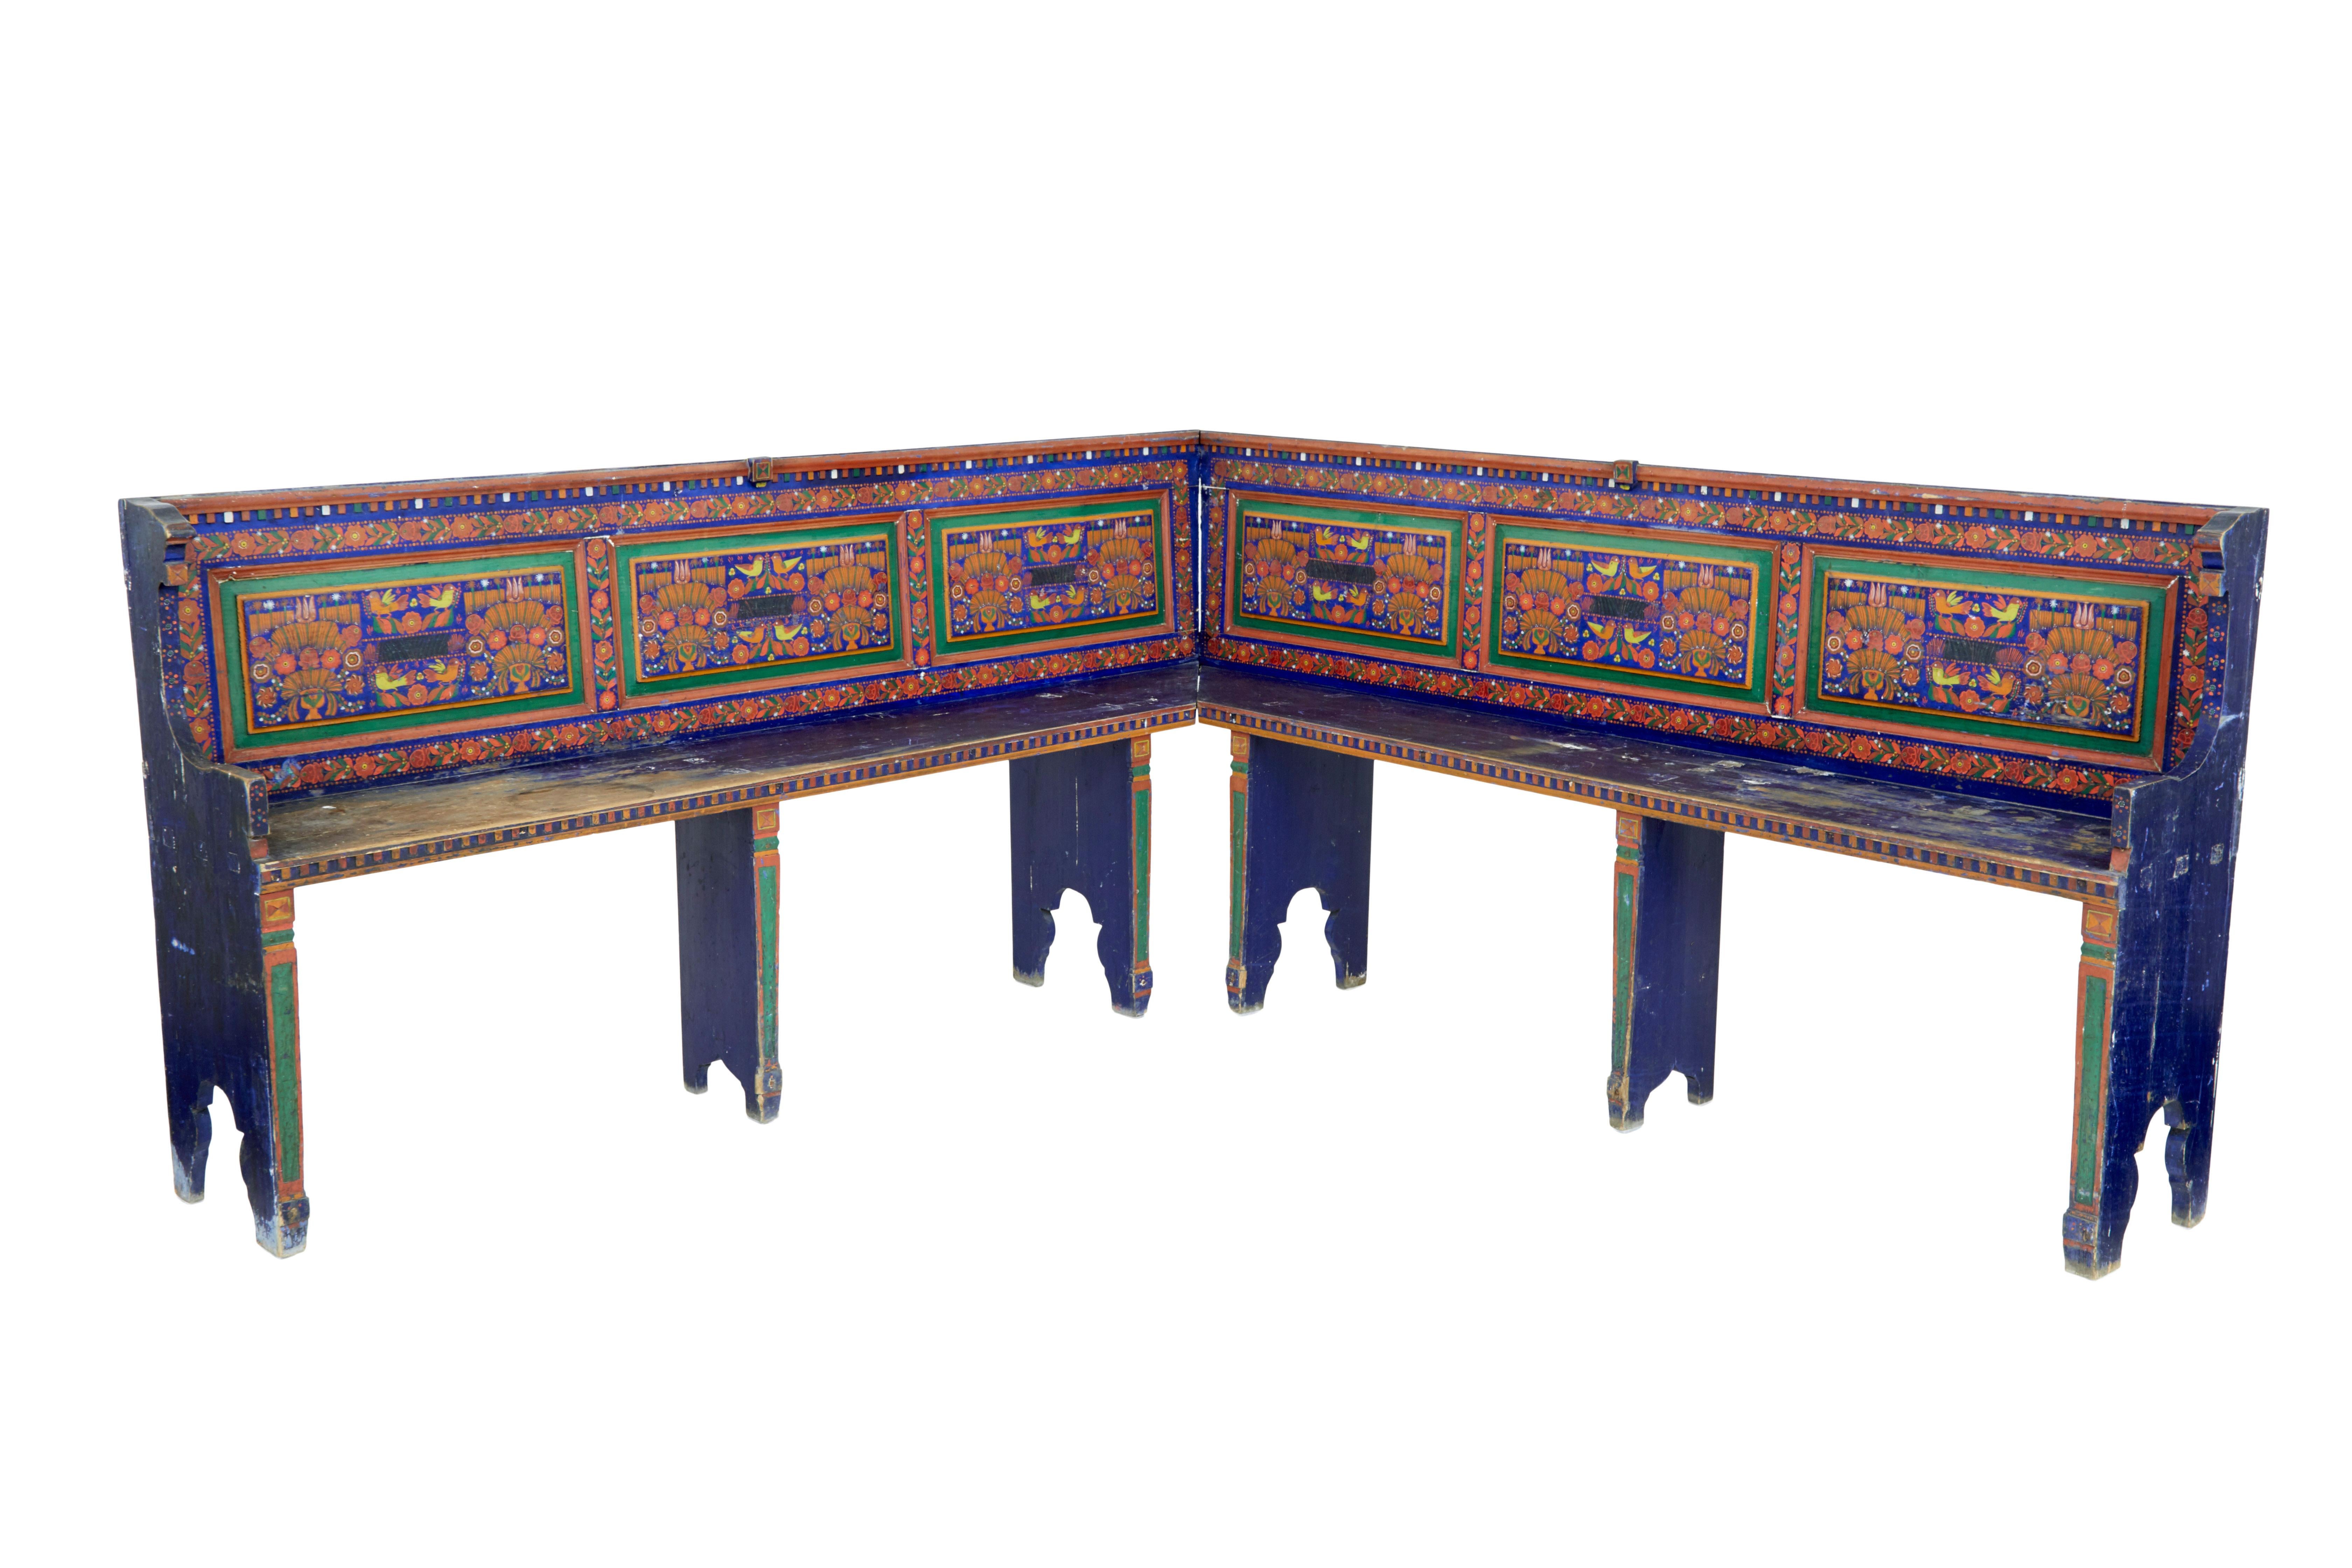 19th Century hand painted folk art corner seat circa 1880.

We are pleased to offer this rare traditional piece of hungarian furniture, hand painted in a blue / green and red colour scheme.

2 Benches interlock to form a 90 degree bench. Both